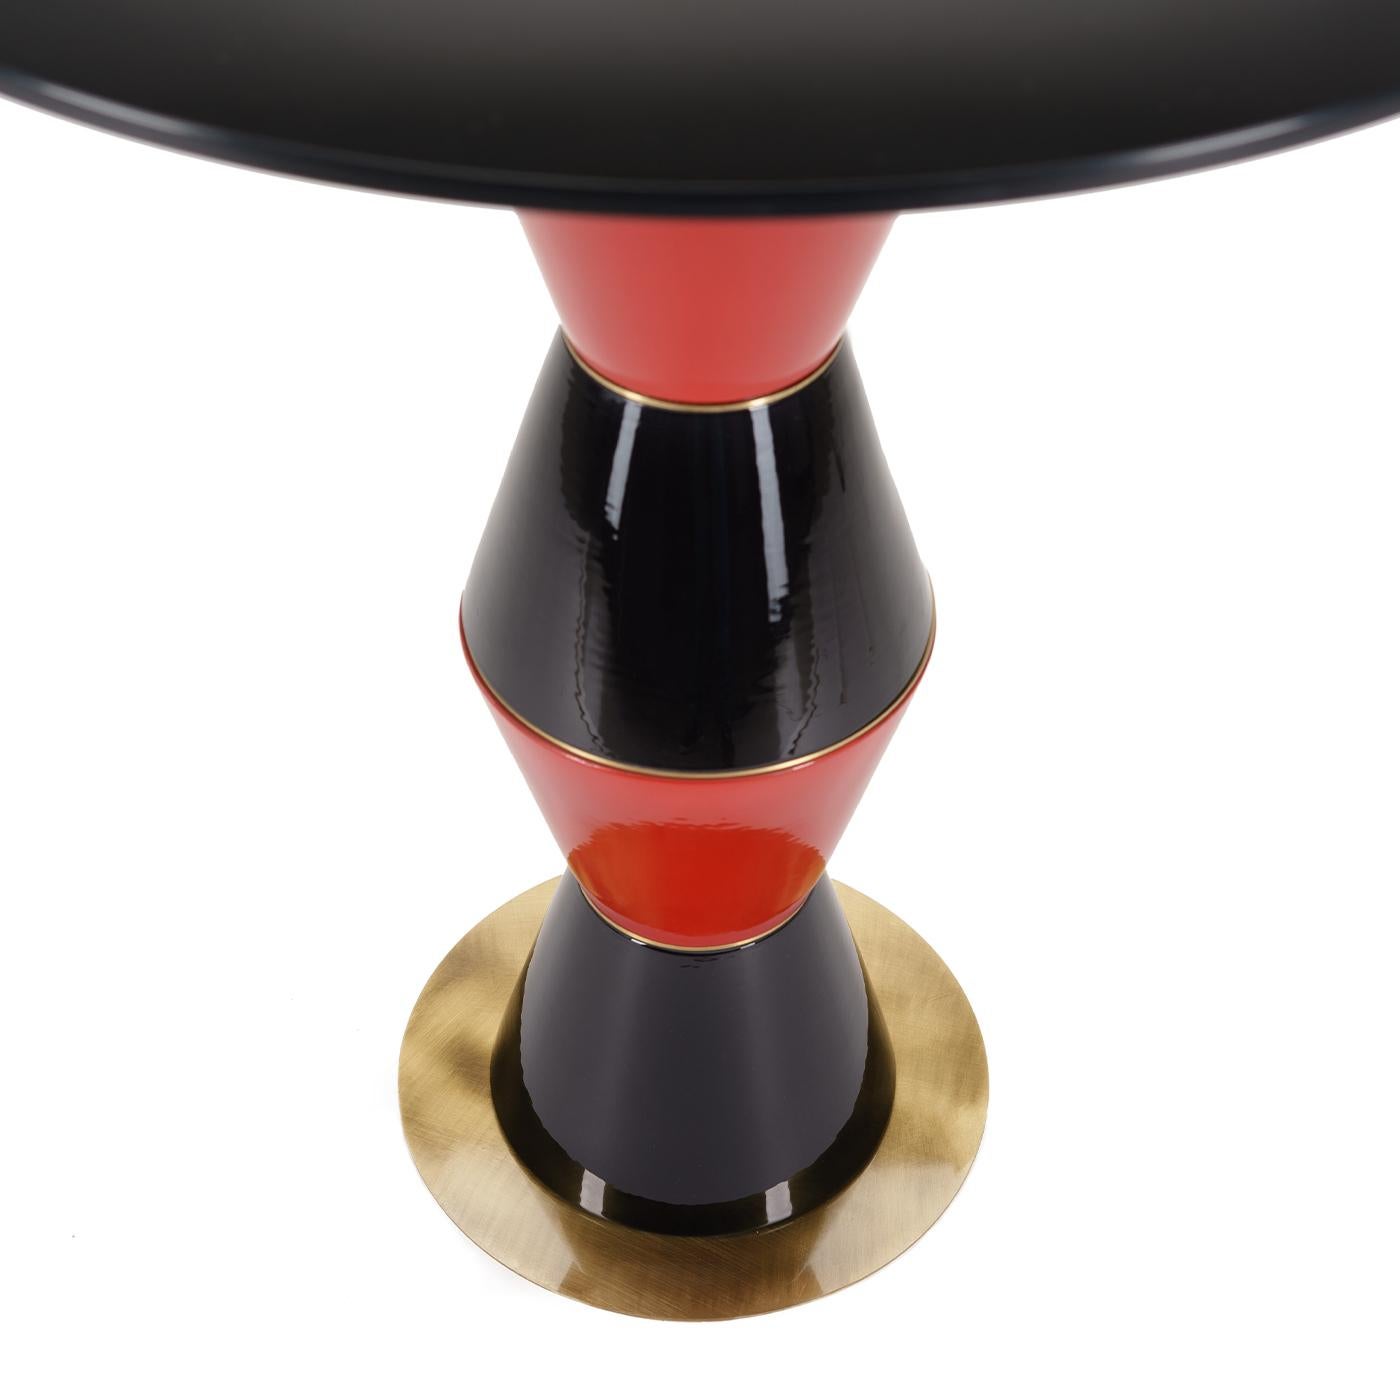 An intriguing interplay of geometric shapes, this side table will effortlessly elevate the look of an eclectic contemporary living room decor. Resting on a round brass base, it features five ceramic elements alternating dark and red hues, ultimately